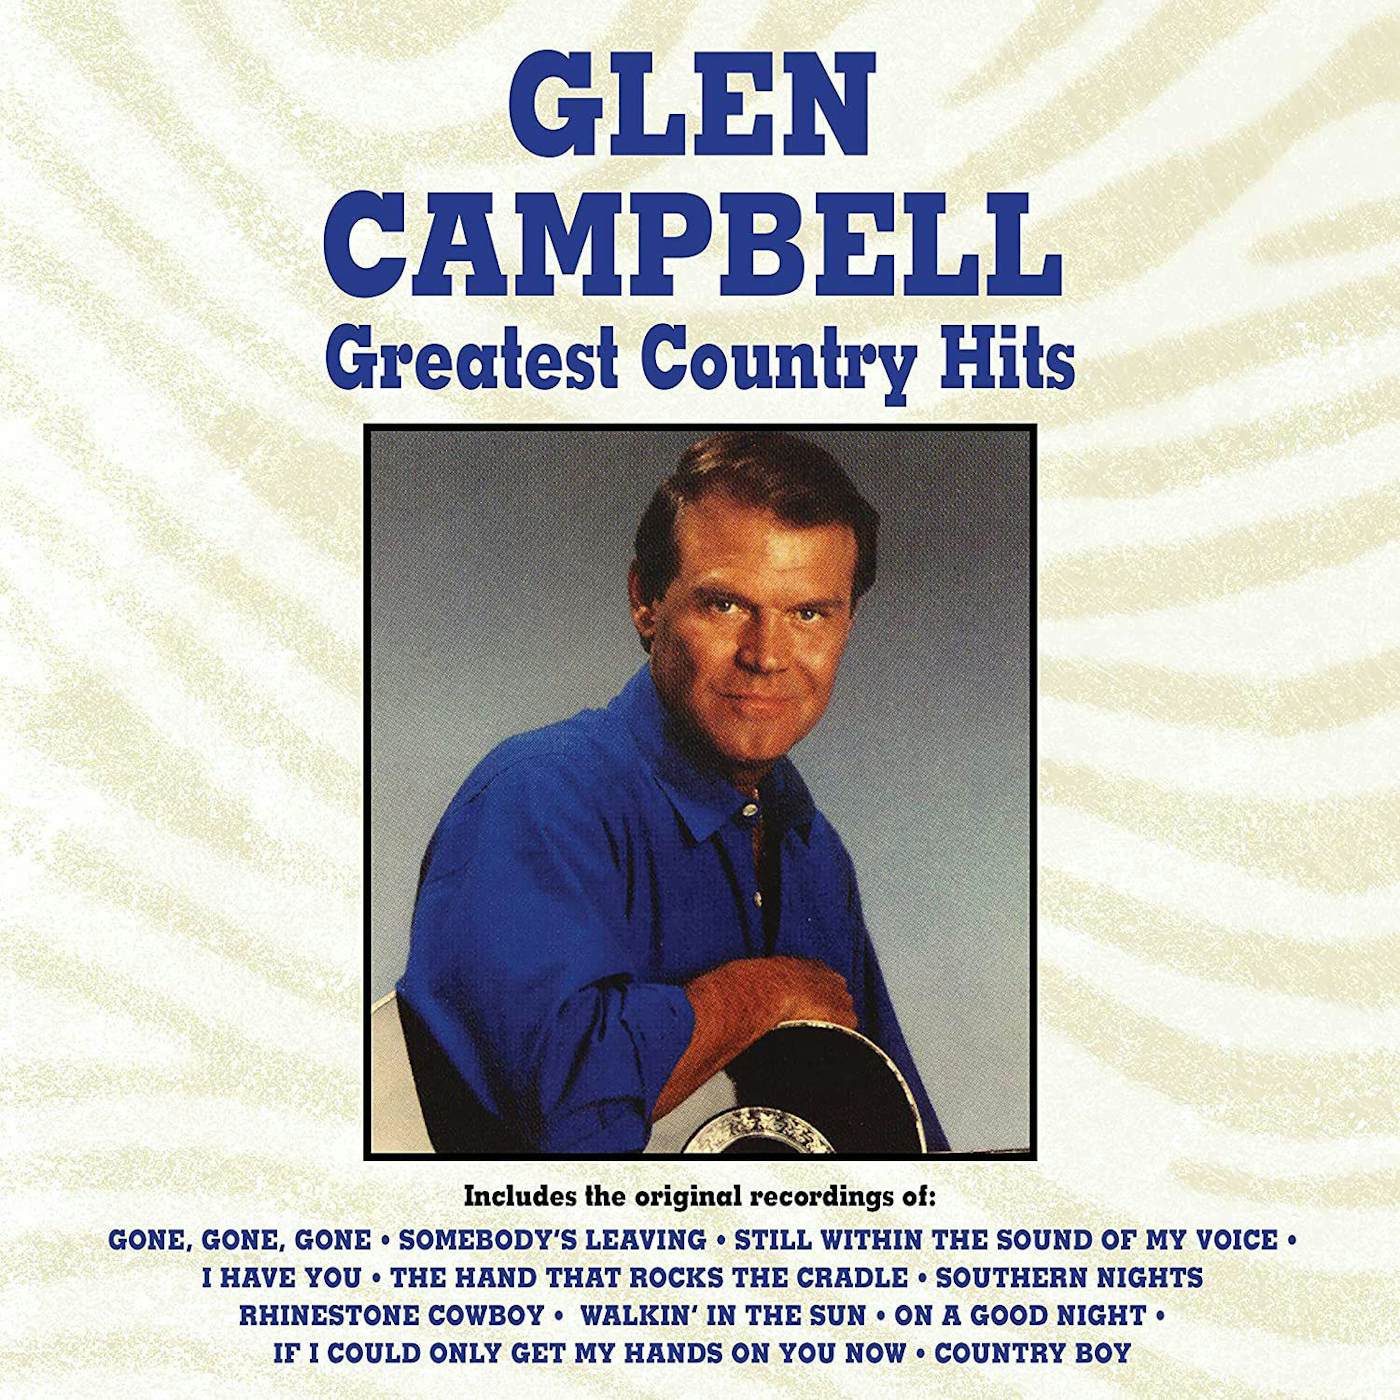 Glen Campbell Greatest Country Hits Vinyl Record